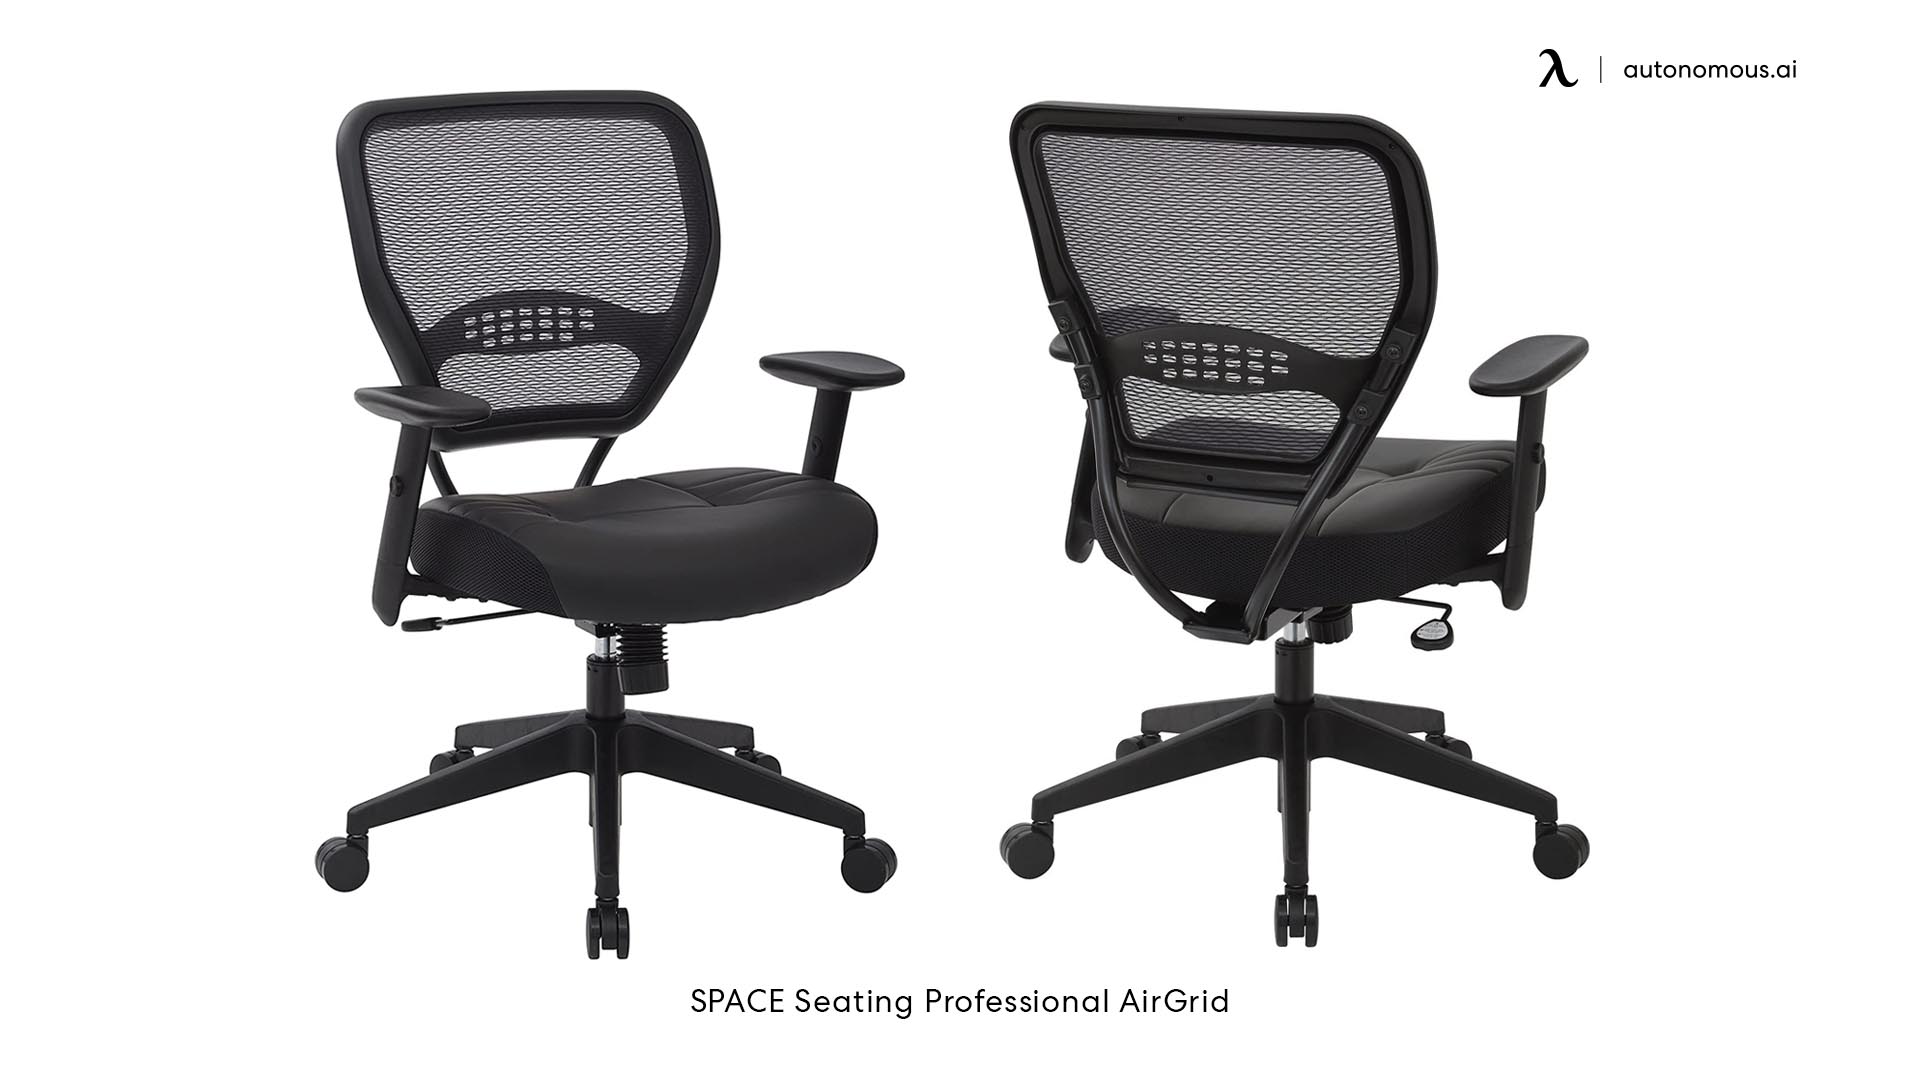 Professional Airgrid from Space Seating